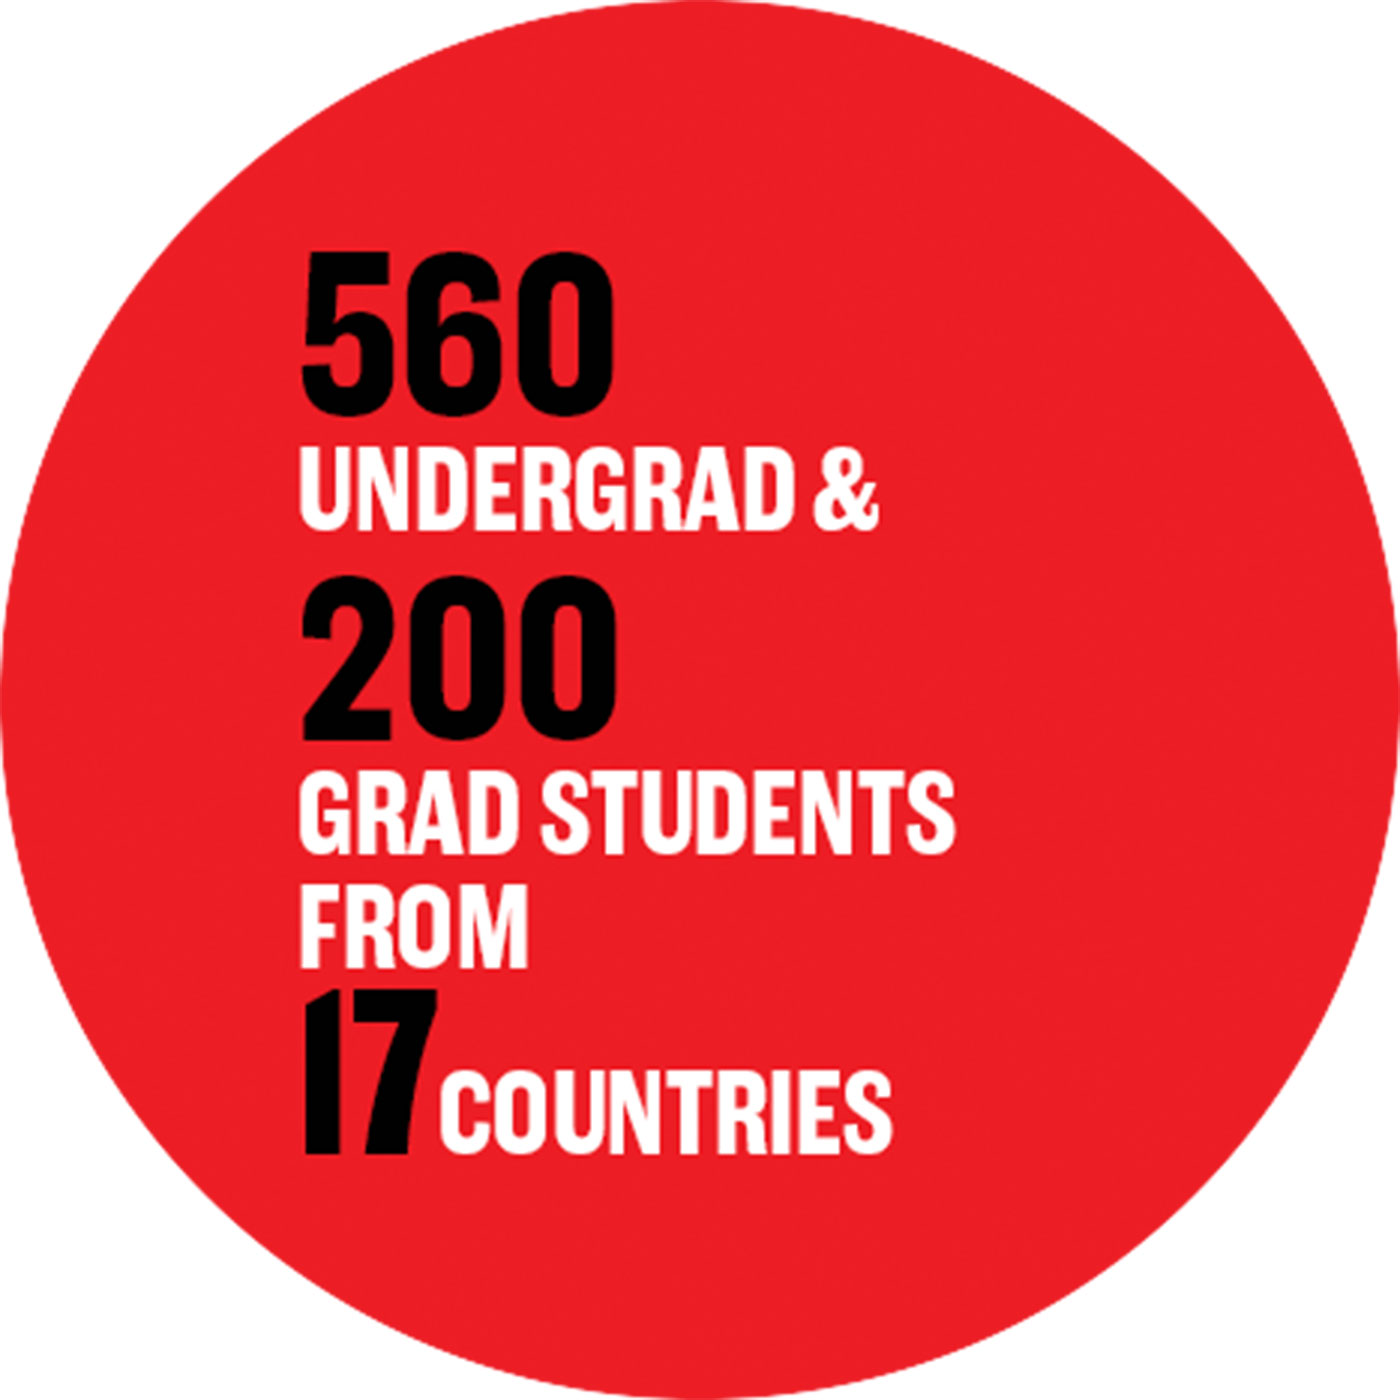 560 undergrad & 200 grad students from 17 countries